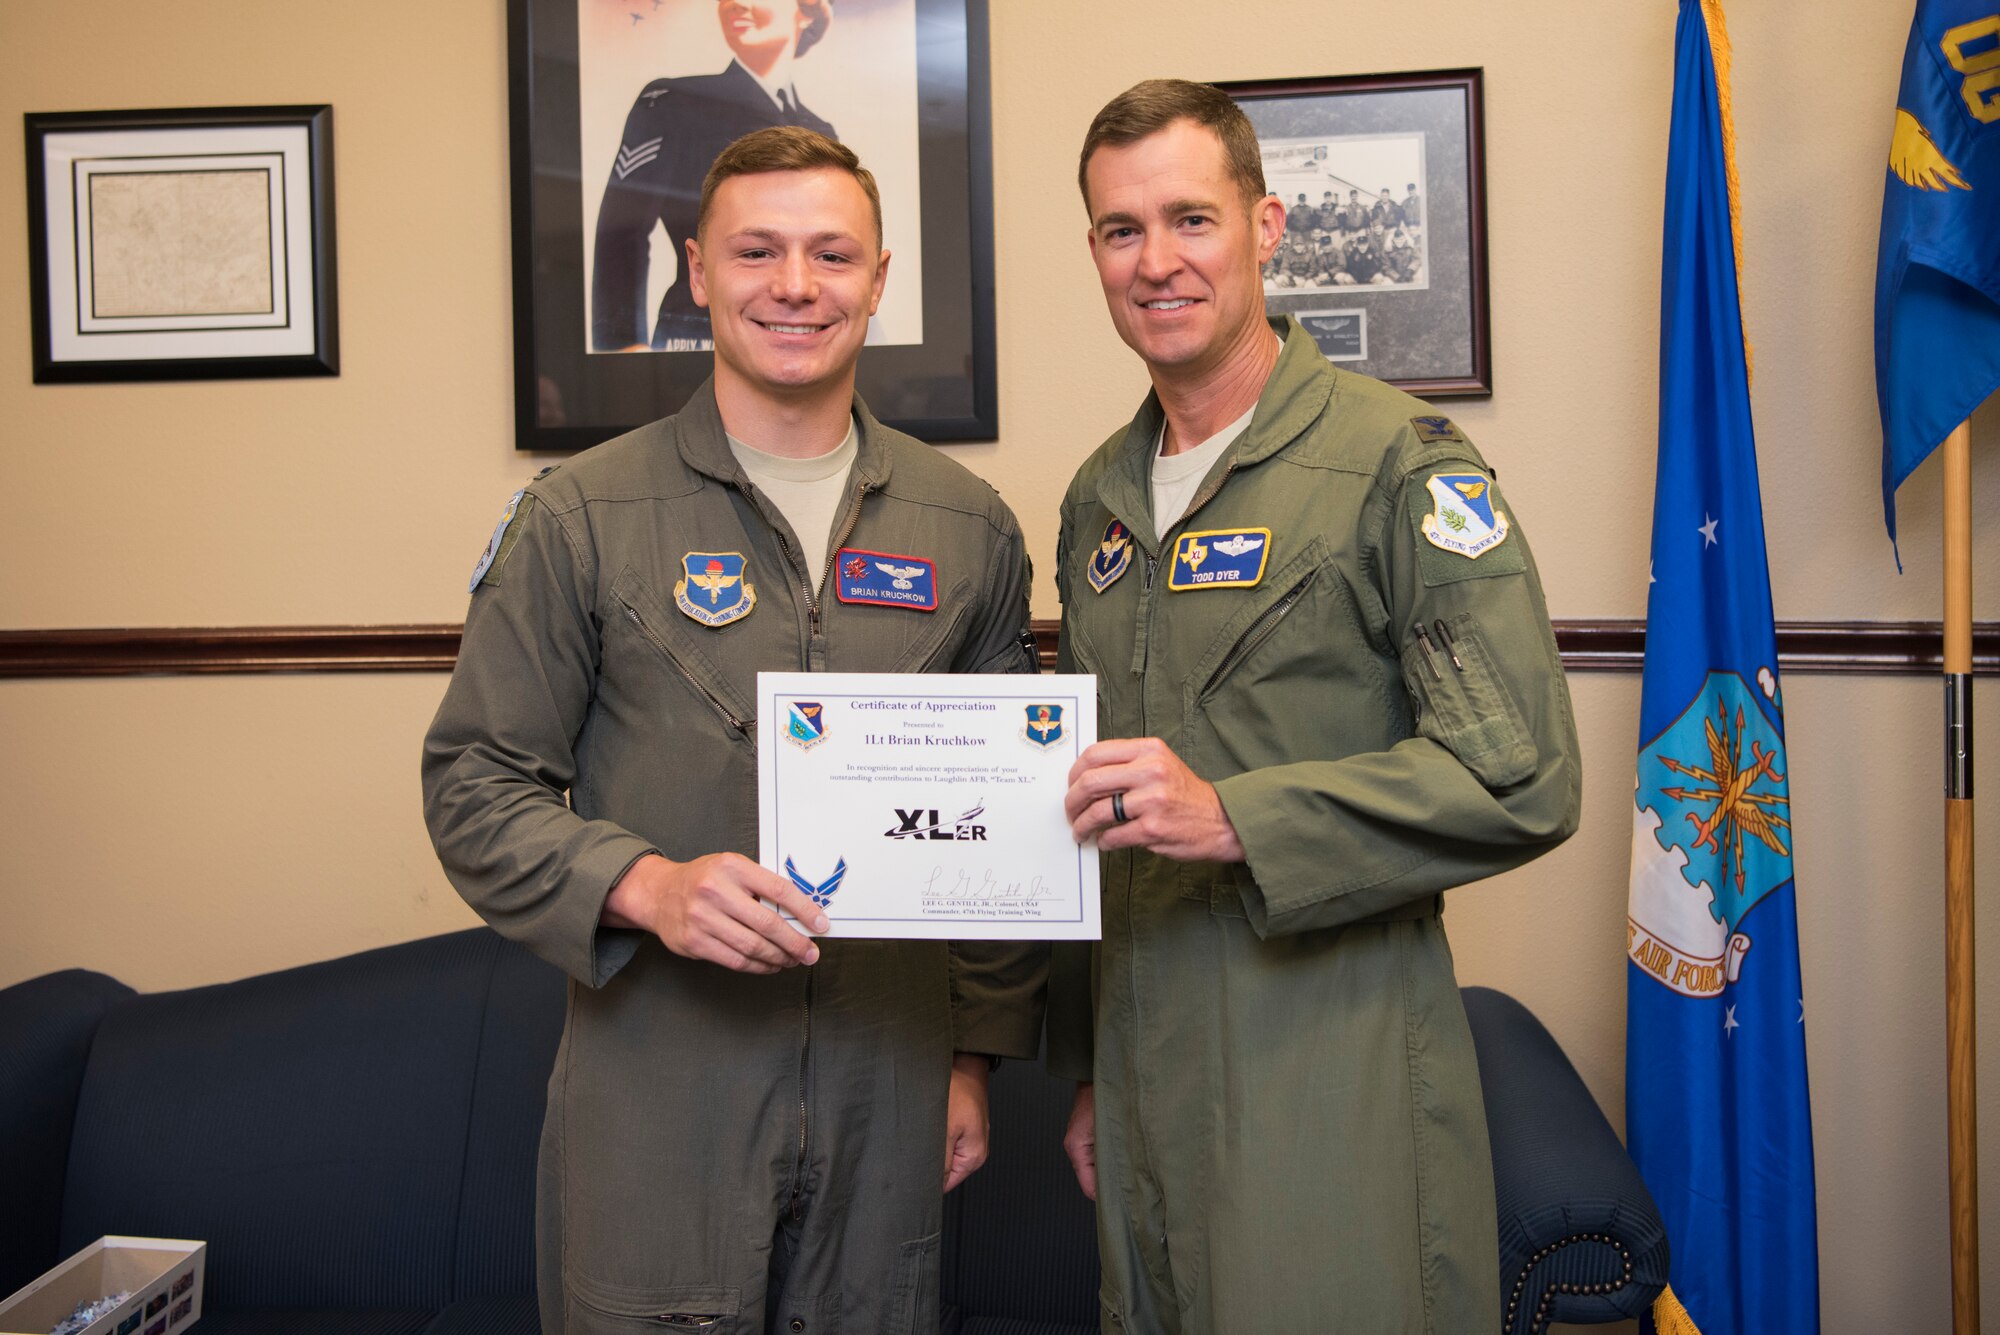 First Lieutenant Brian Kruchkow, 434th Flying Training Squadron T-6A Texan II instructor pilot, was chosen by wing leadership to be the “XLer” of the week, for the week of June 17, 2019, at Laughlin Air Force Base, Texas. The “XLer” award, presented by Col. Todd Dyer, 47th Flying Training Wing vice commander, is given to those who consistently make outstanding contributions to their unit and the Laughlin mission. (U.S. Air Force photo by Airman 1st Class Marco A. Gomez)